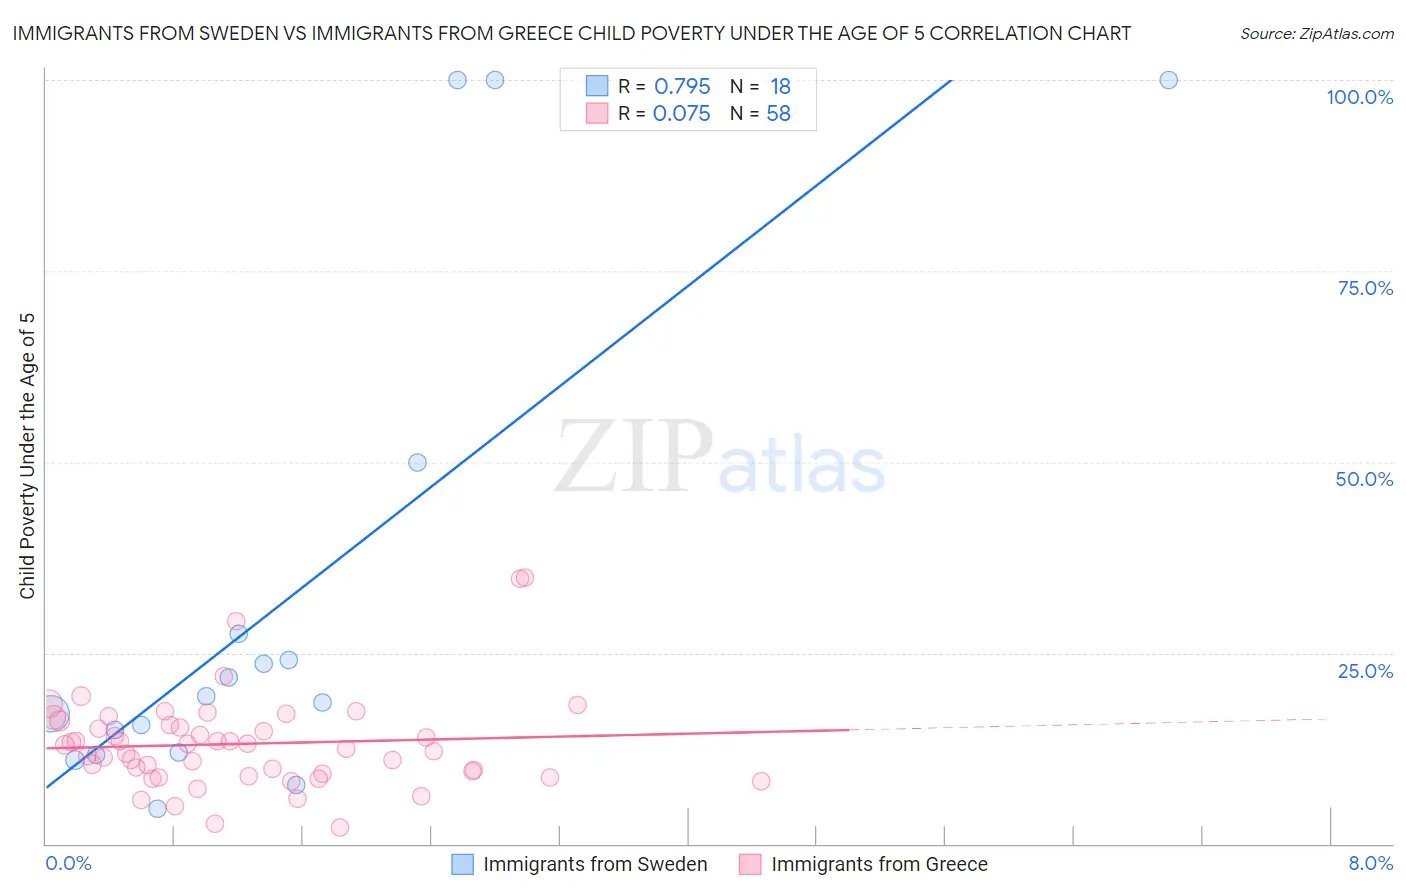 Immigrants from Sweden vs Immigrants from Greece Child Poverty Under the Age of 5